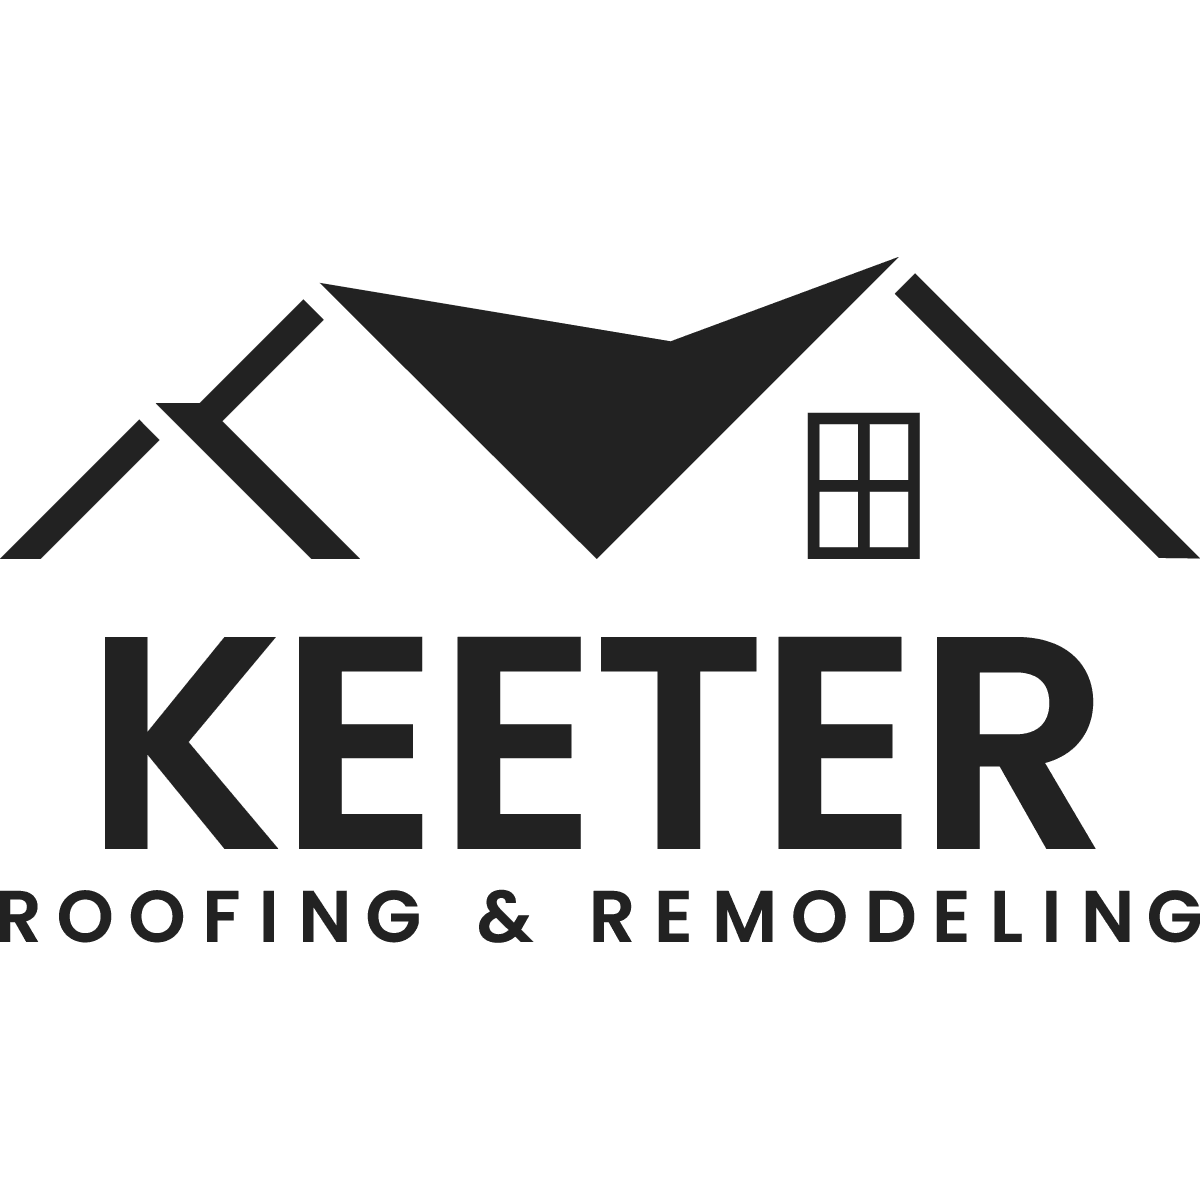 Keeter Roofing and Remodeling